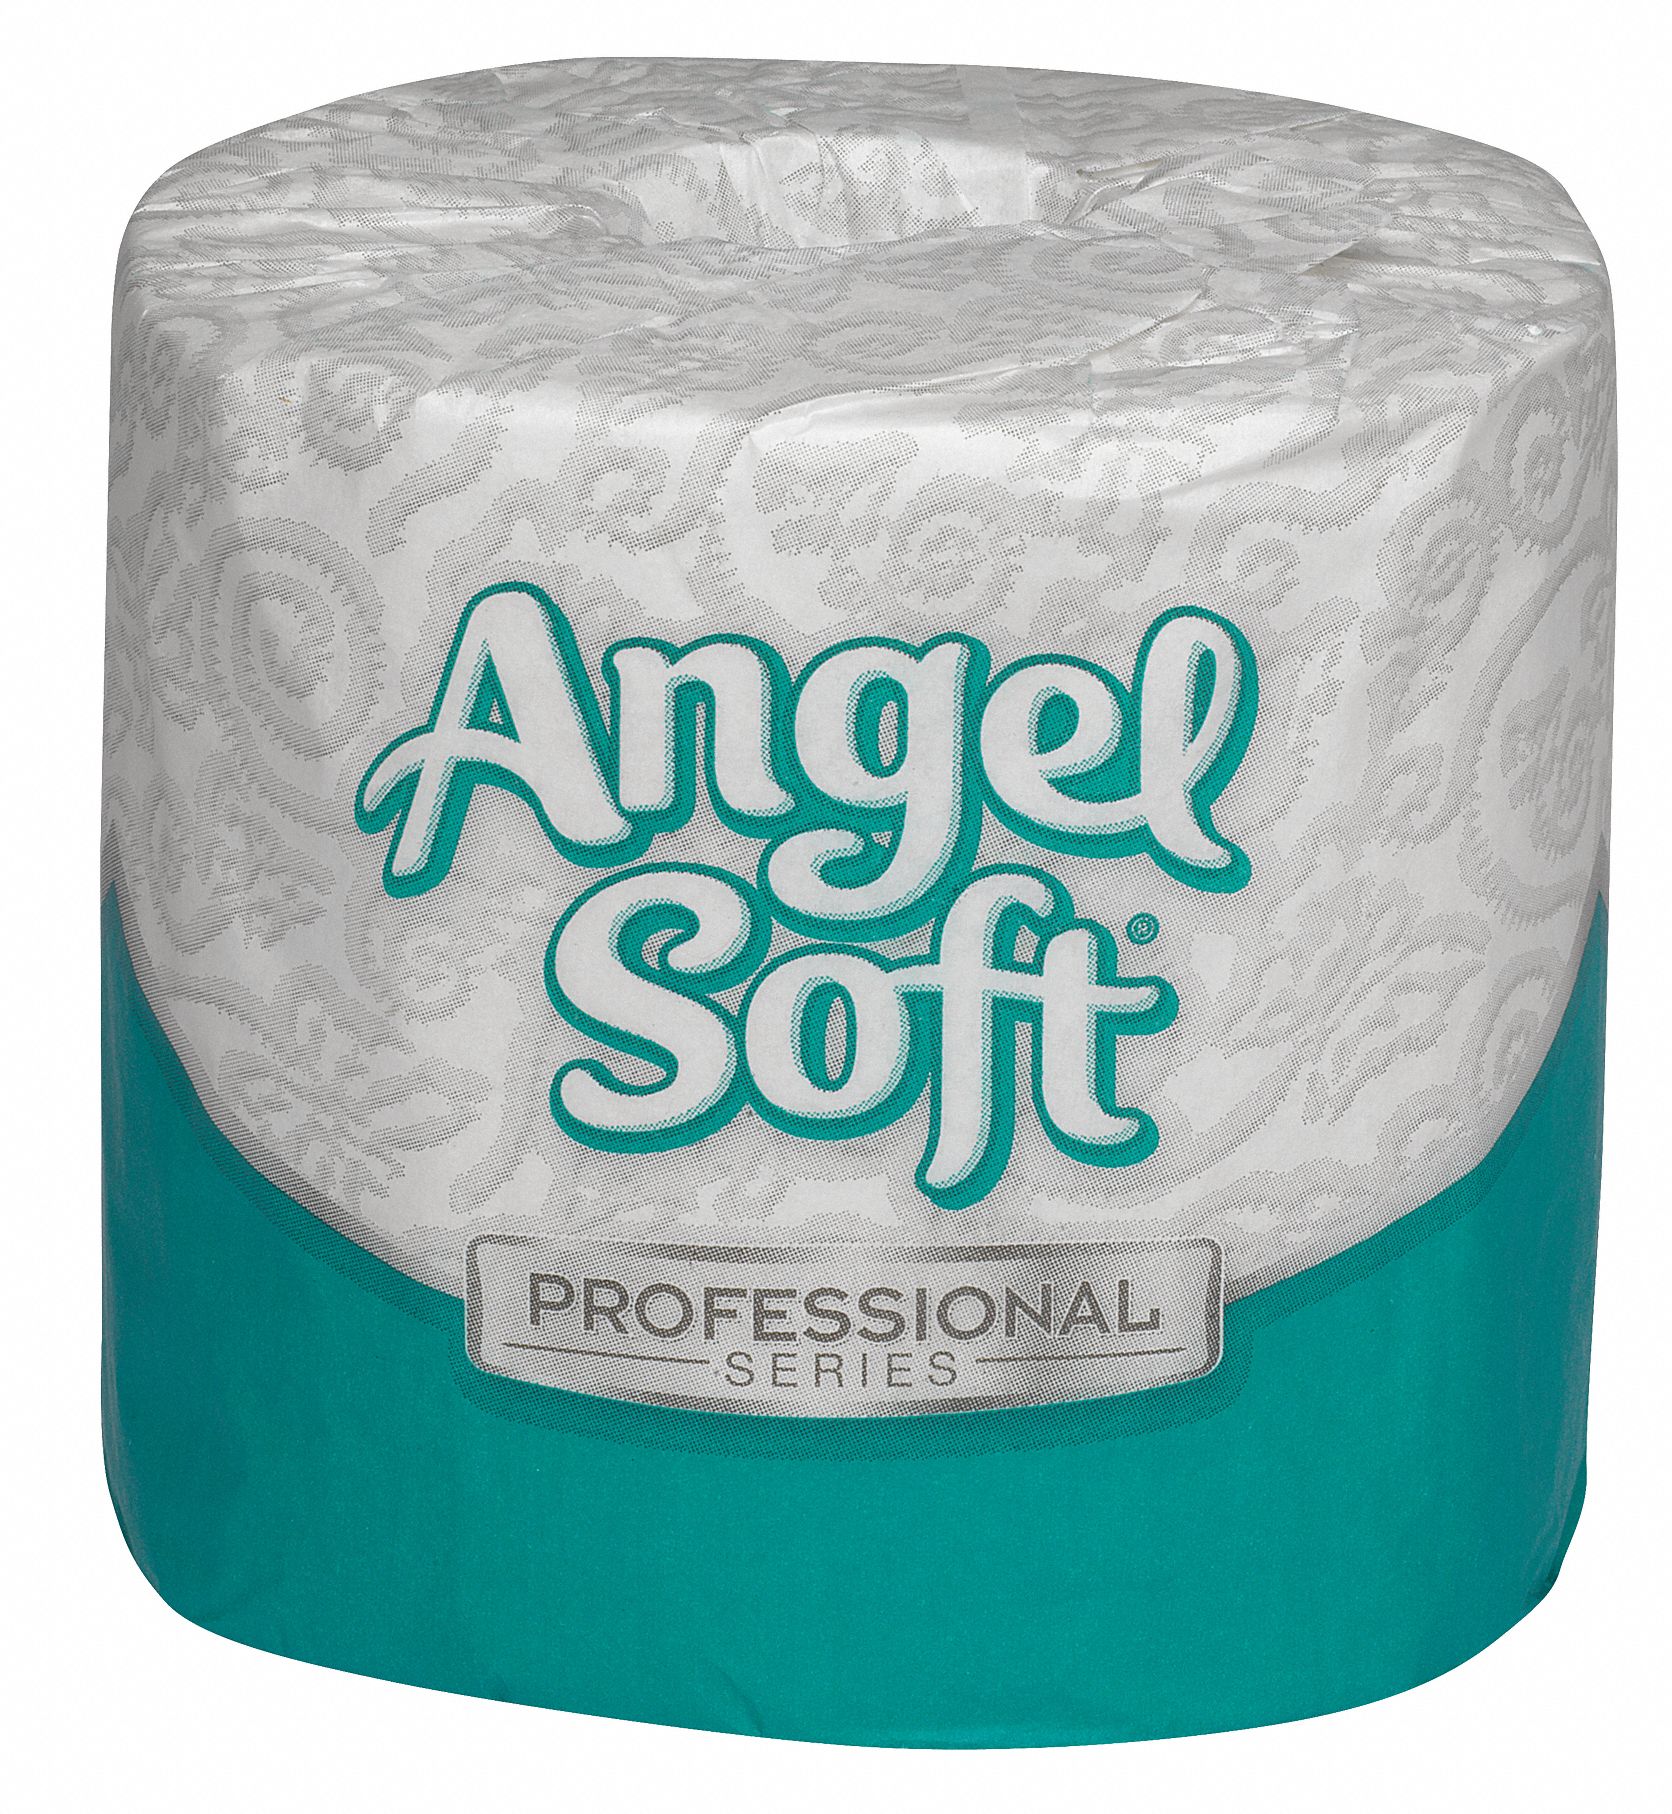 10F286 - Toilet Paper Angel Soft ps 2Ply PK20